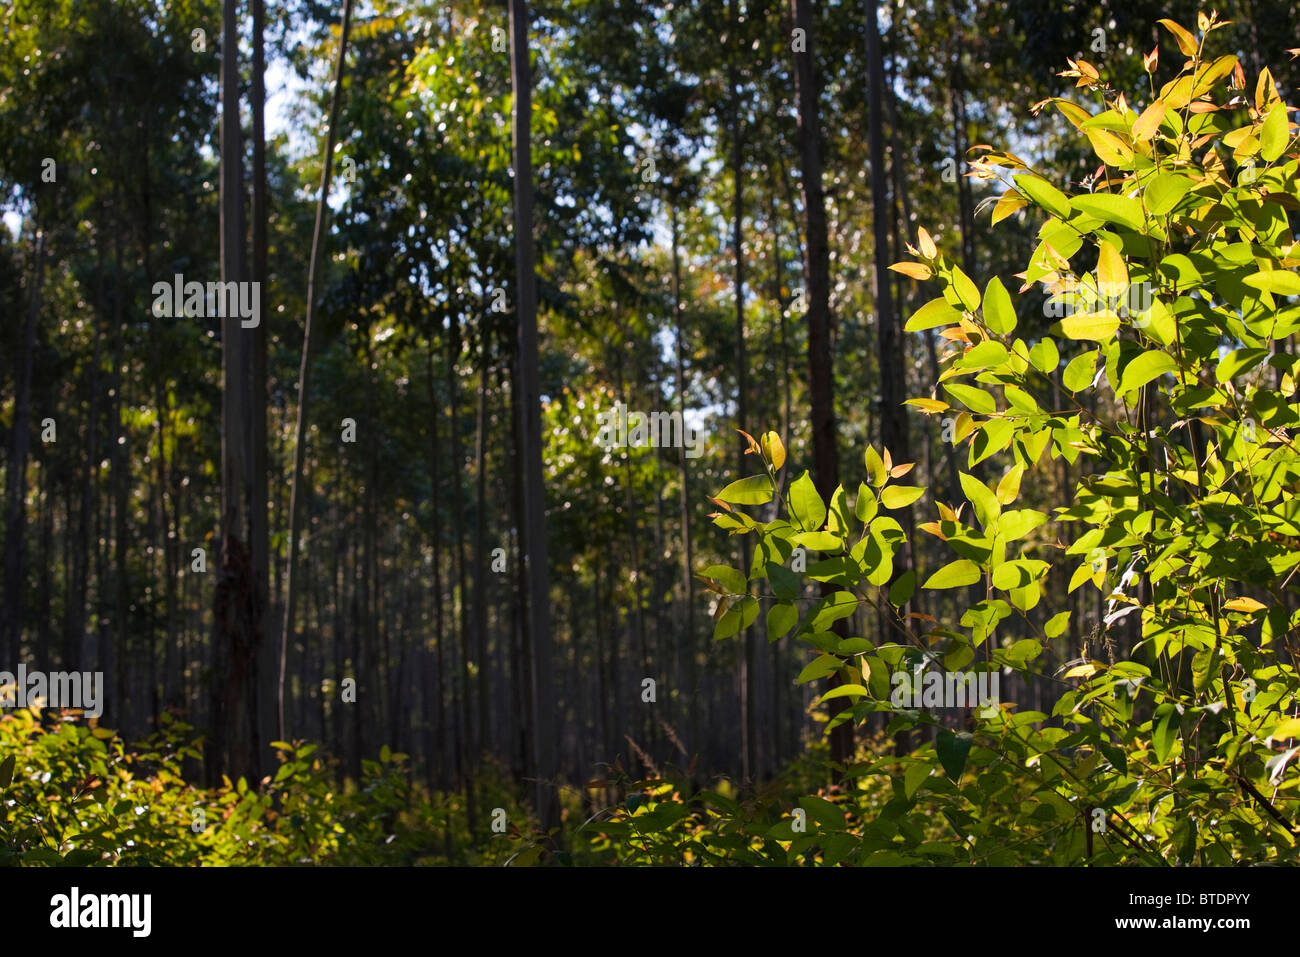 A green leafy bush with gum trees in the background Stock Photo